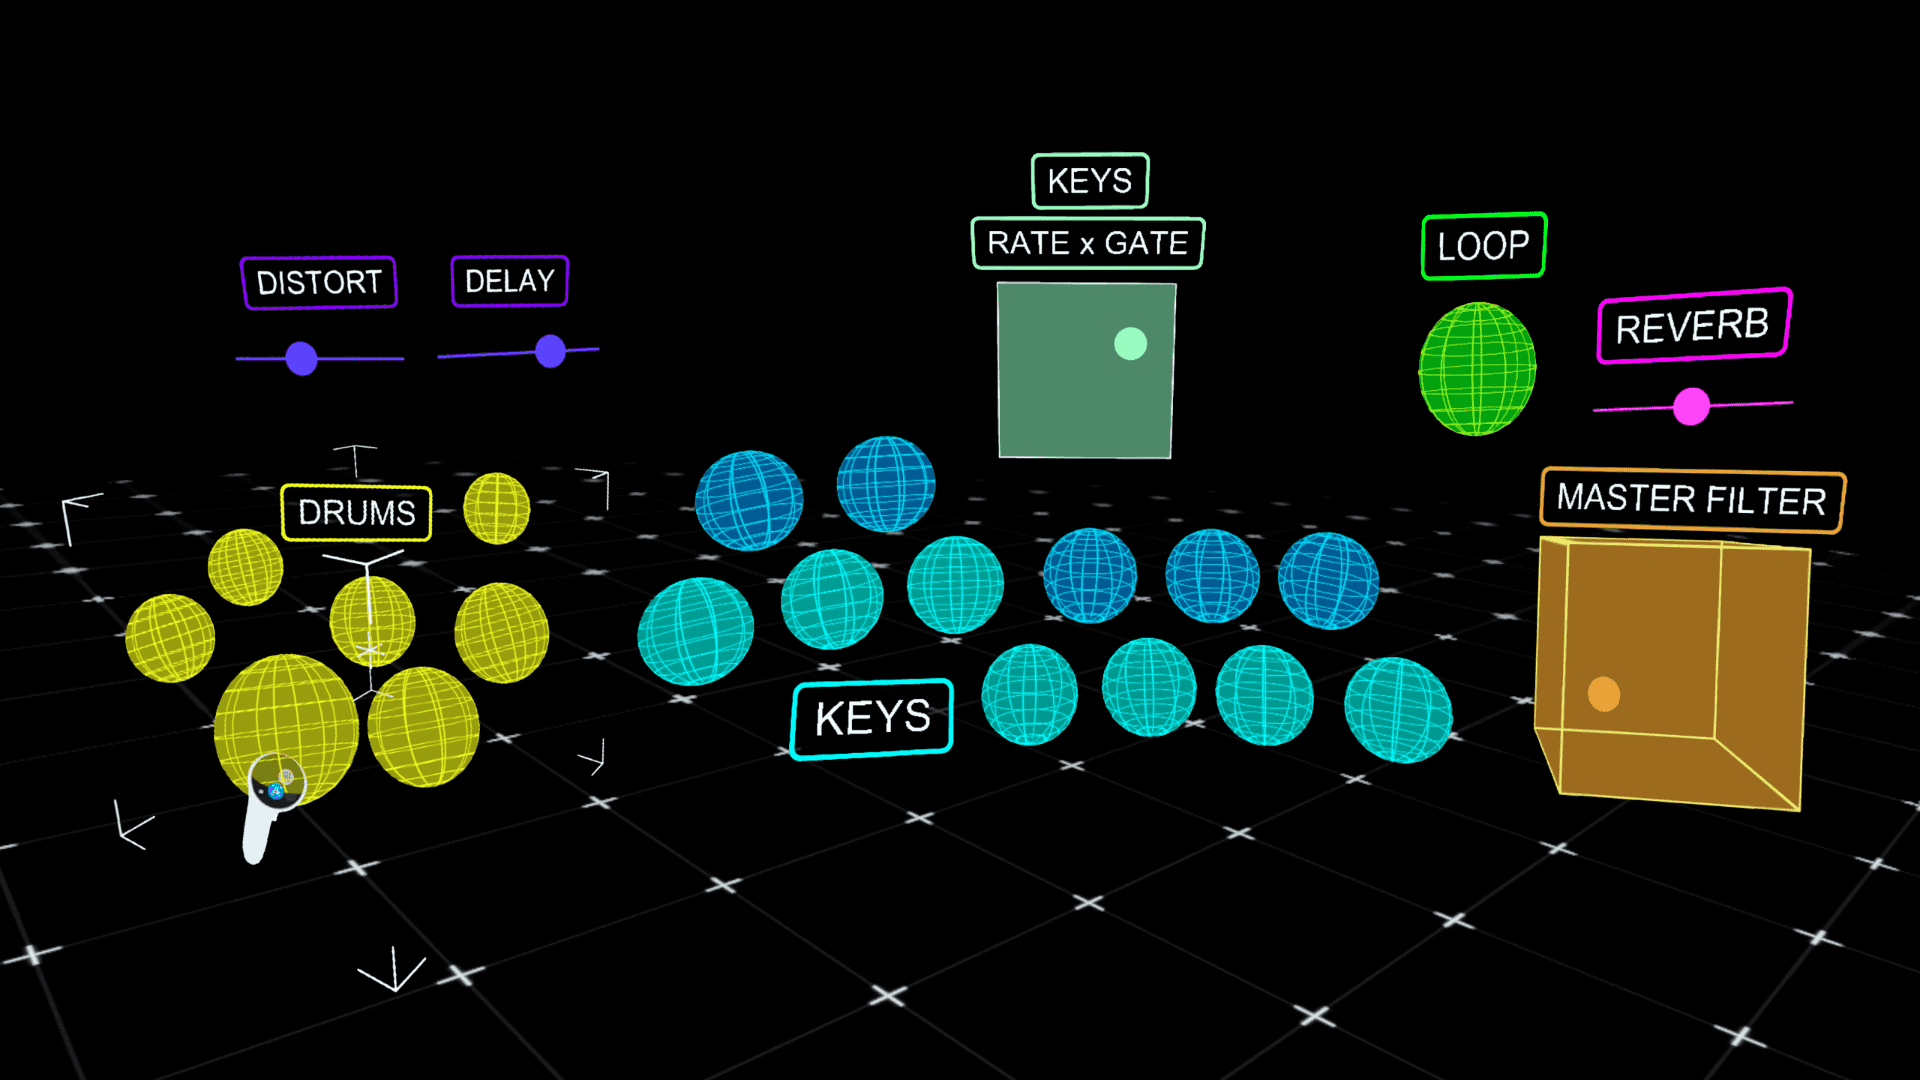 A virtual MoveMusic layout in a black VR space. There are colored groups of various geometric shapes which are interactable controls and text labels for some controls.